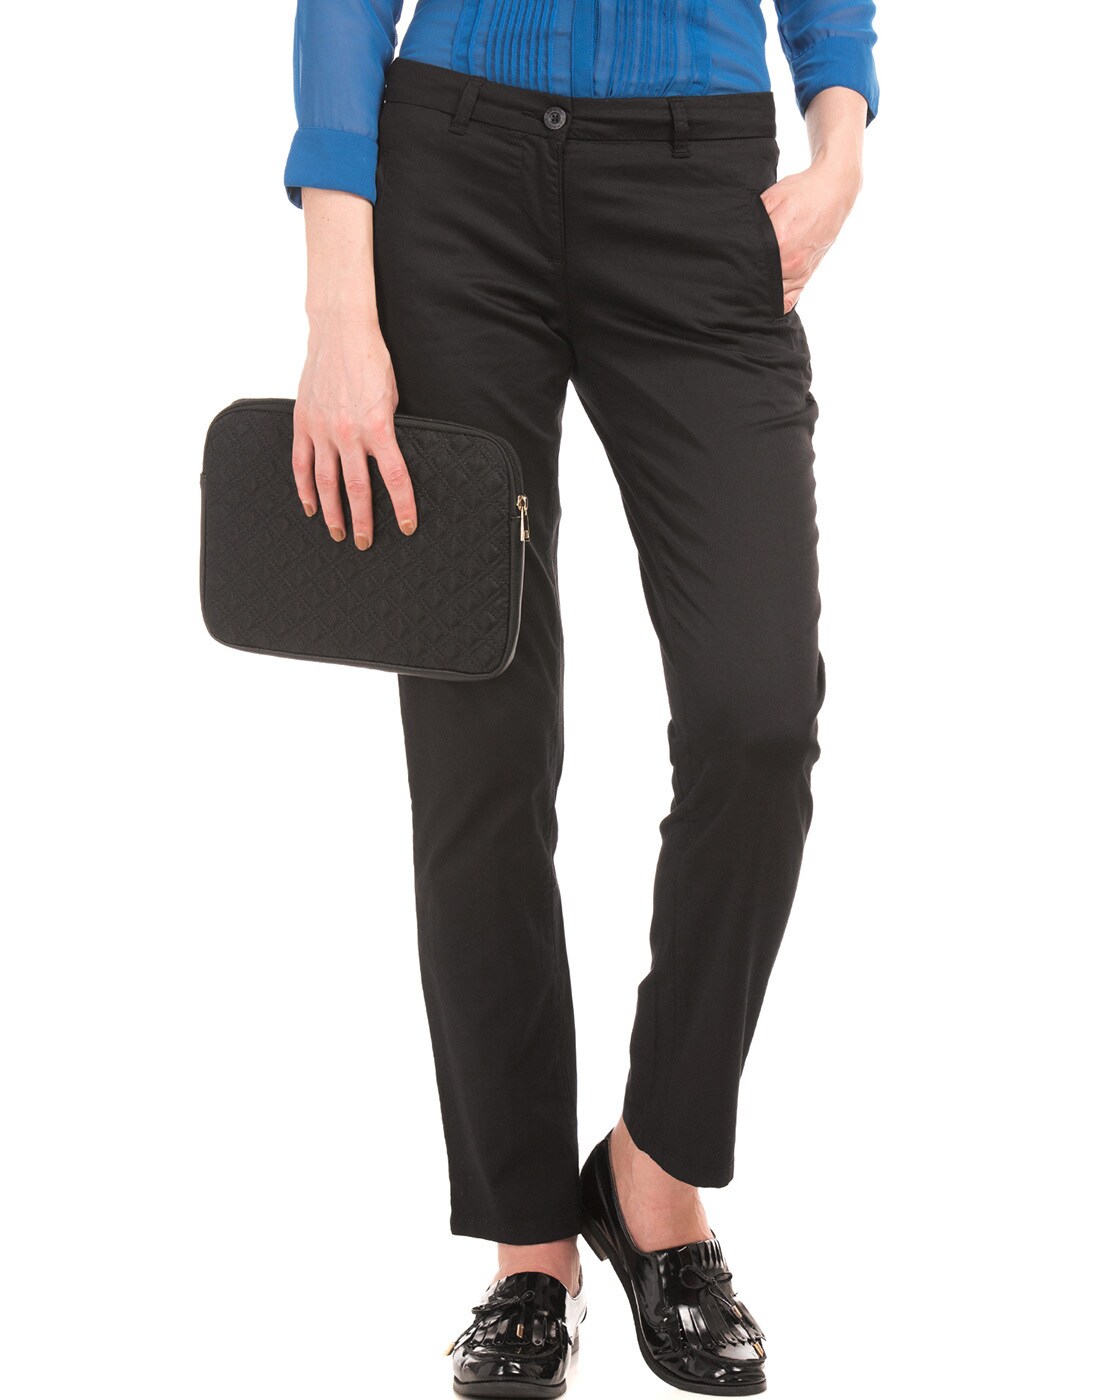 Arrow Sports Casual Trousers  Buy Arrow Sports Beige Pleated Cotton Stretch  Casual Trousers Online  Nykaa Fashion